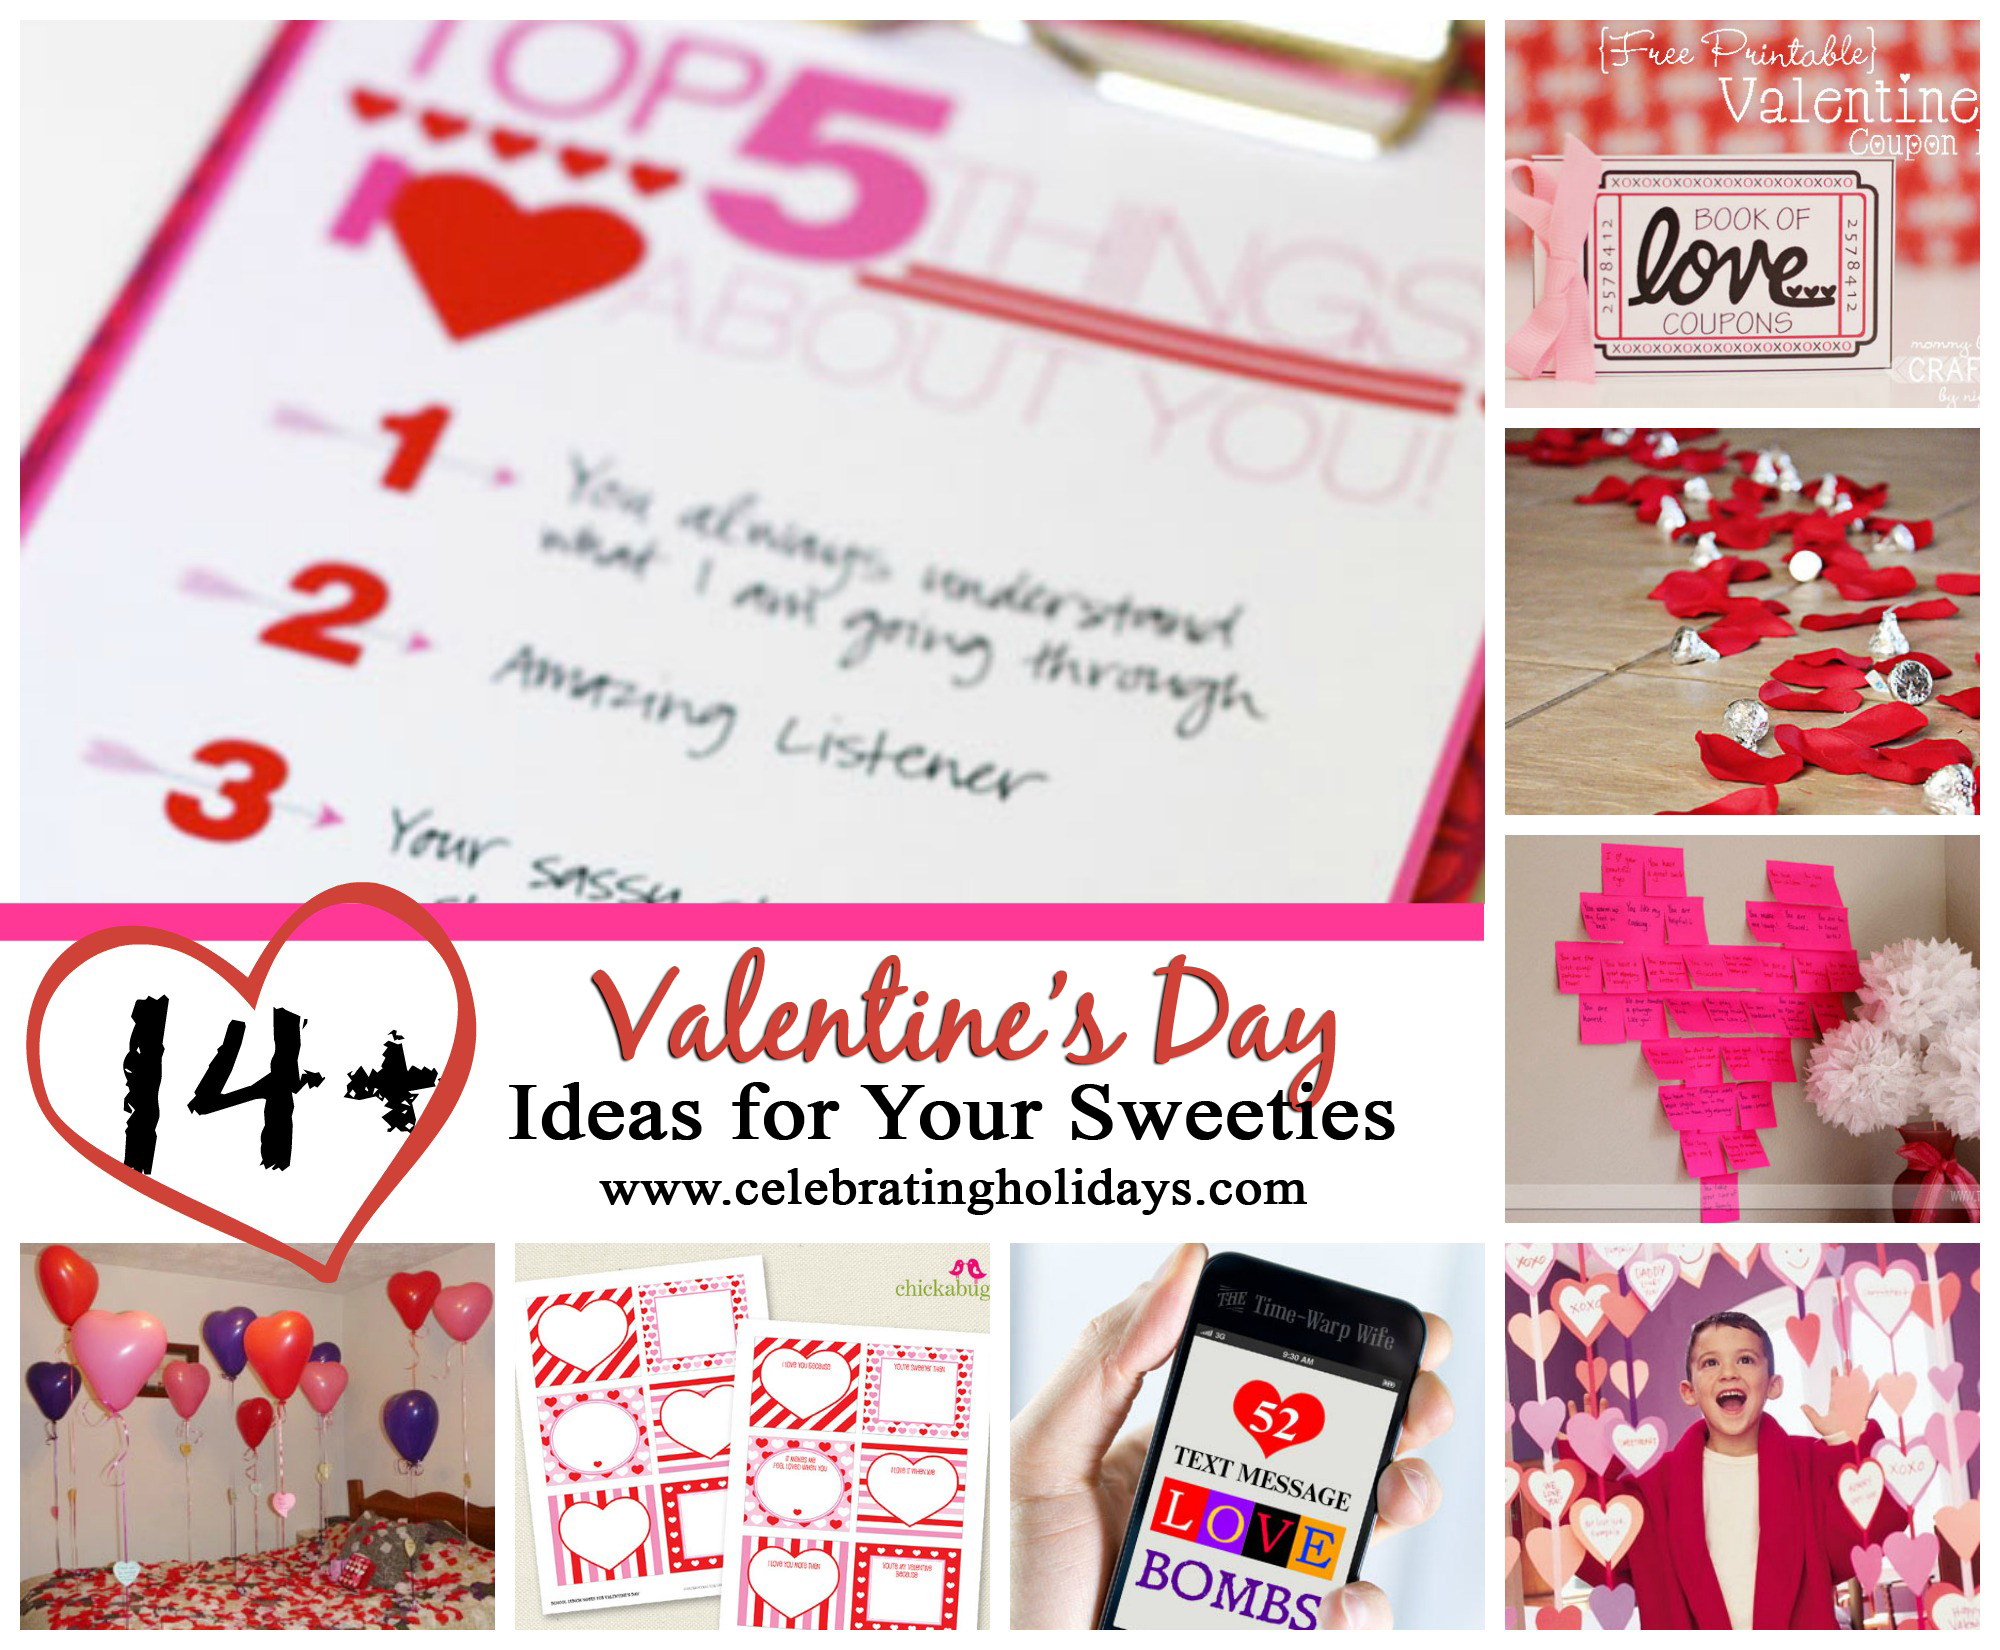 Special Ways to Love On Your Family for Valentine's Day